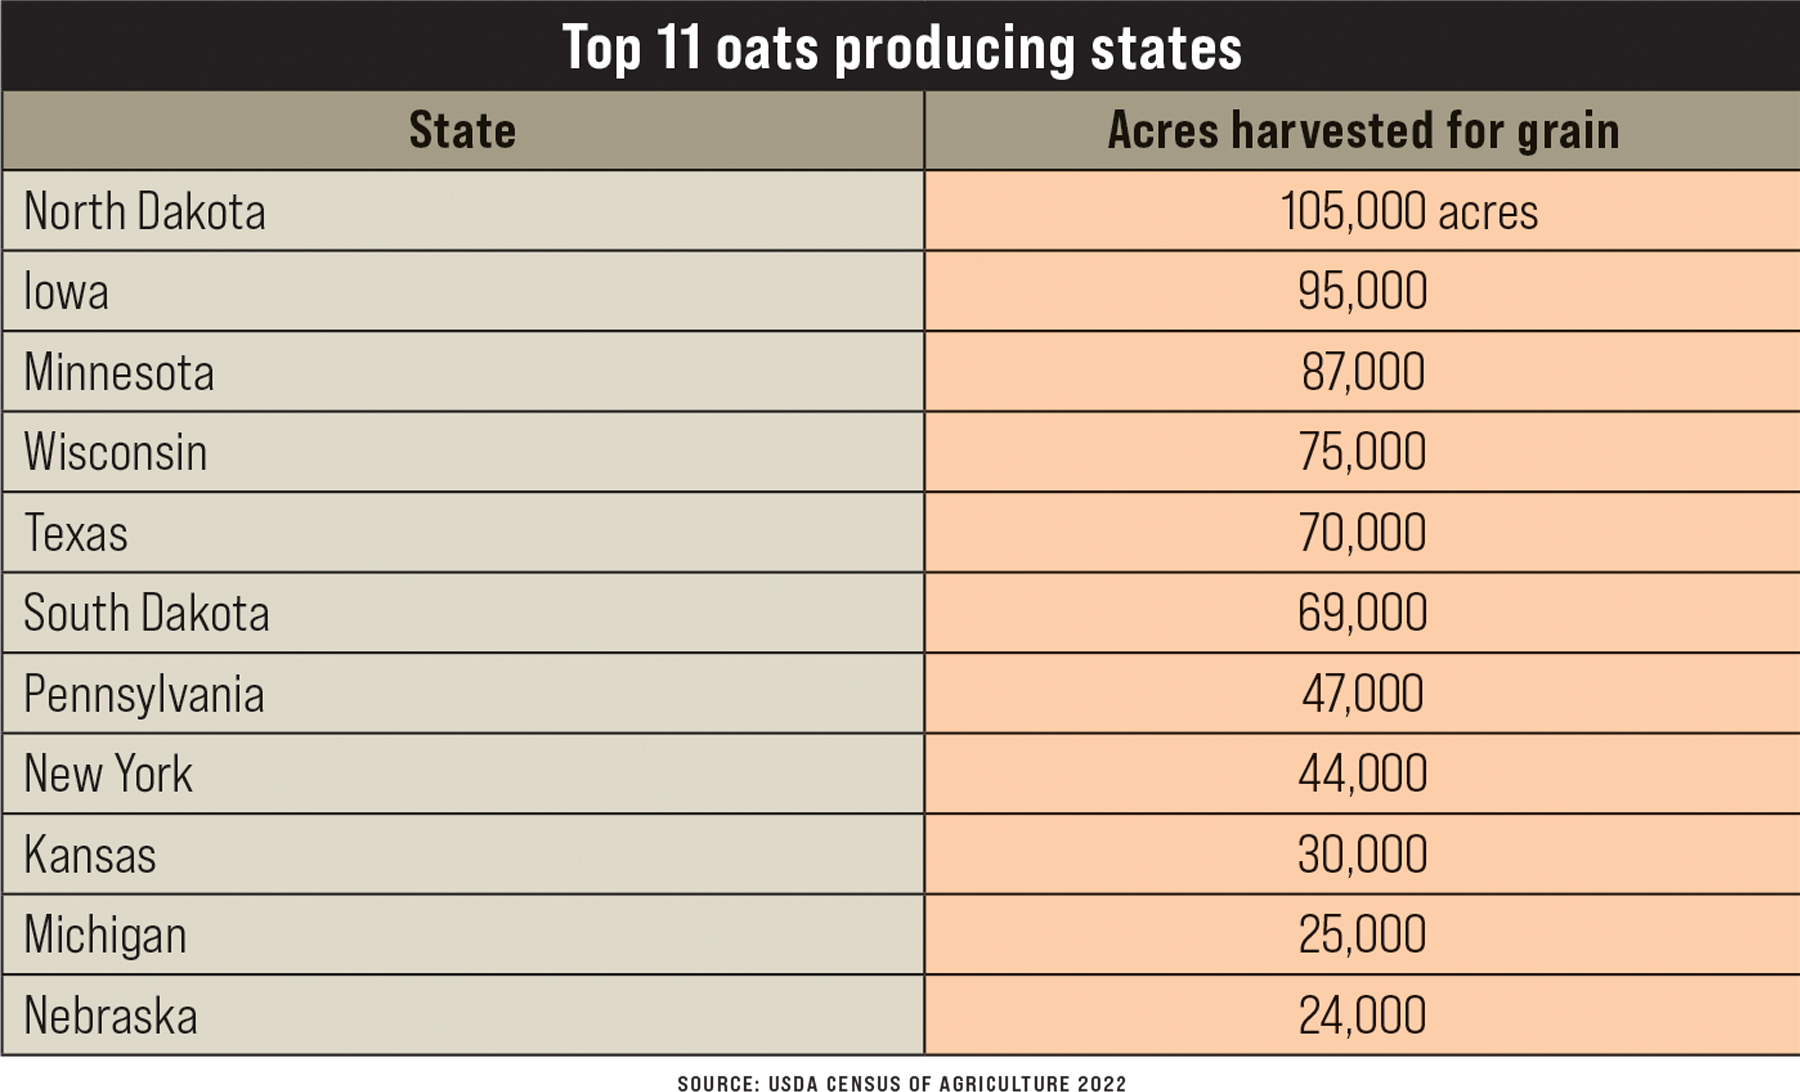 Top 11 oats producing states table